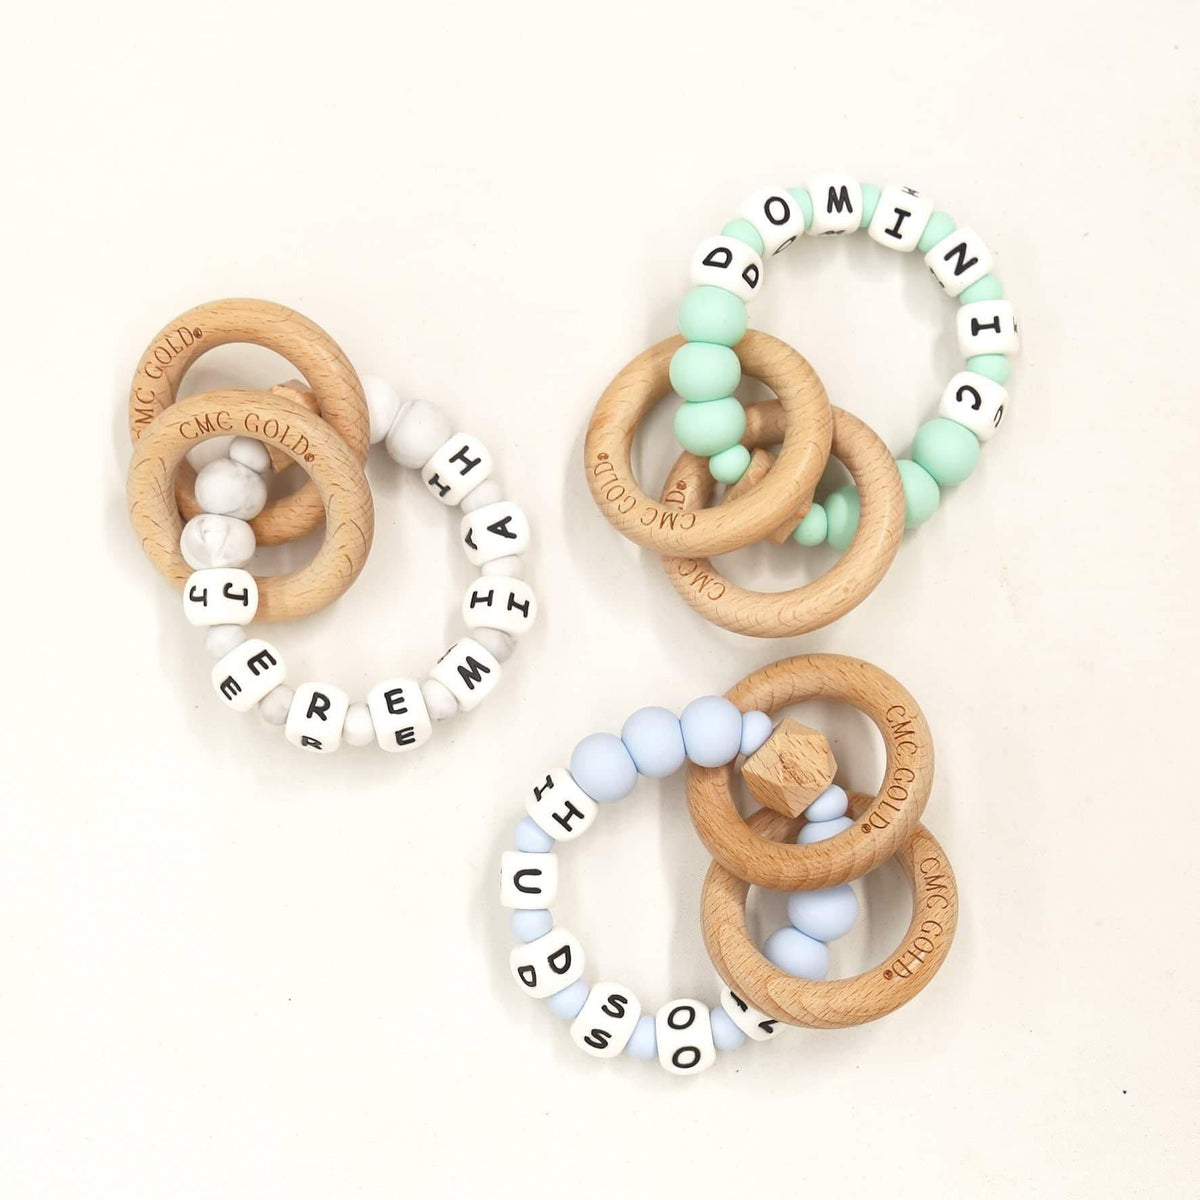 CMC GOLD - Personalised Hex & Silicone Teether